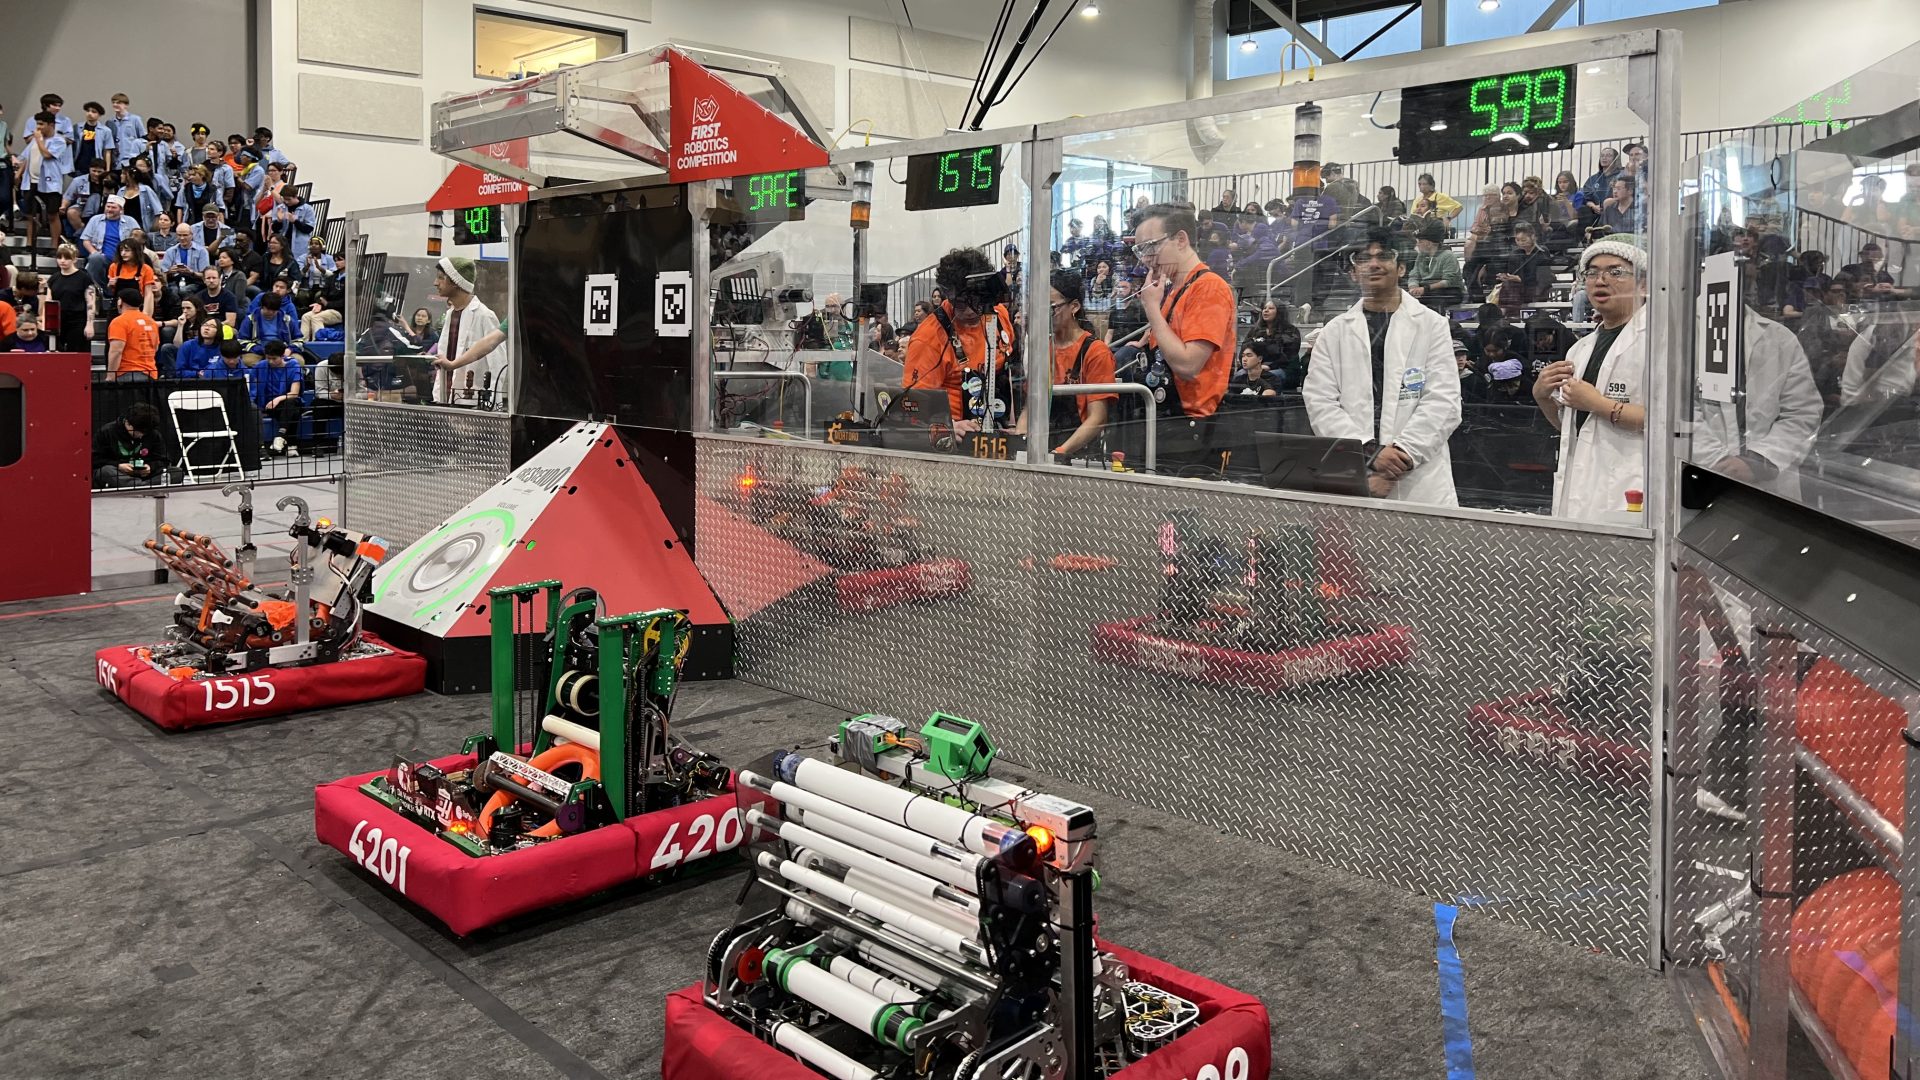 Teams prepare for a playoff match at the L.A. regional FIRST Robotics Competition in El Segundo on March 17.